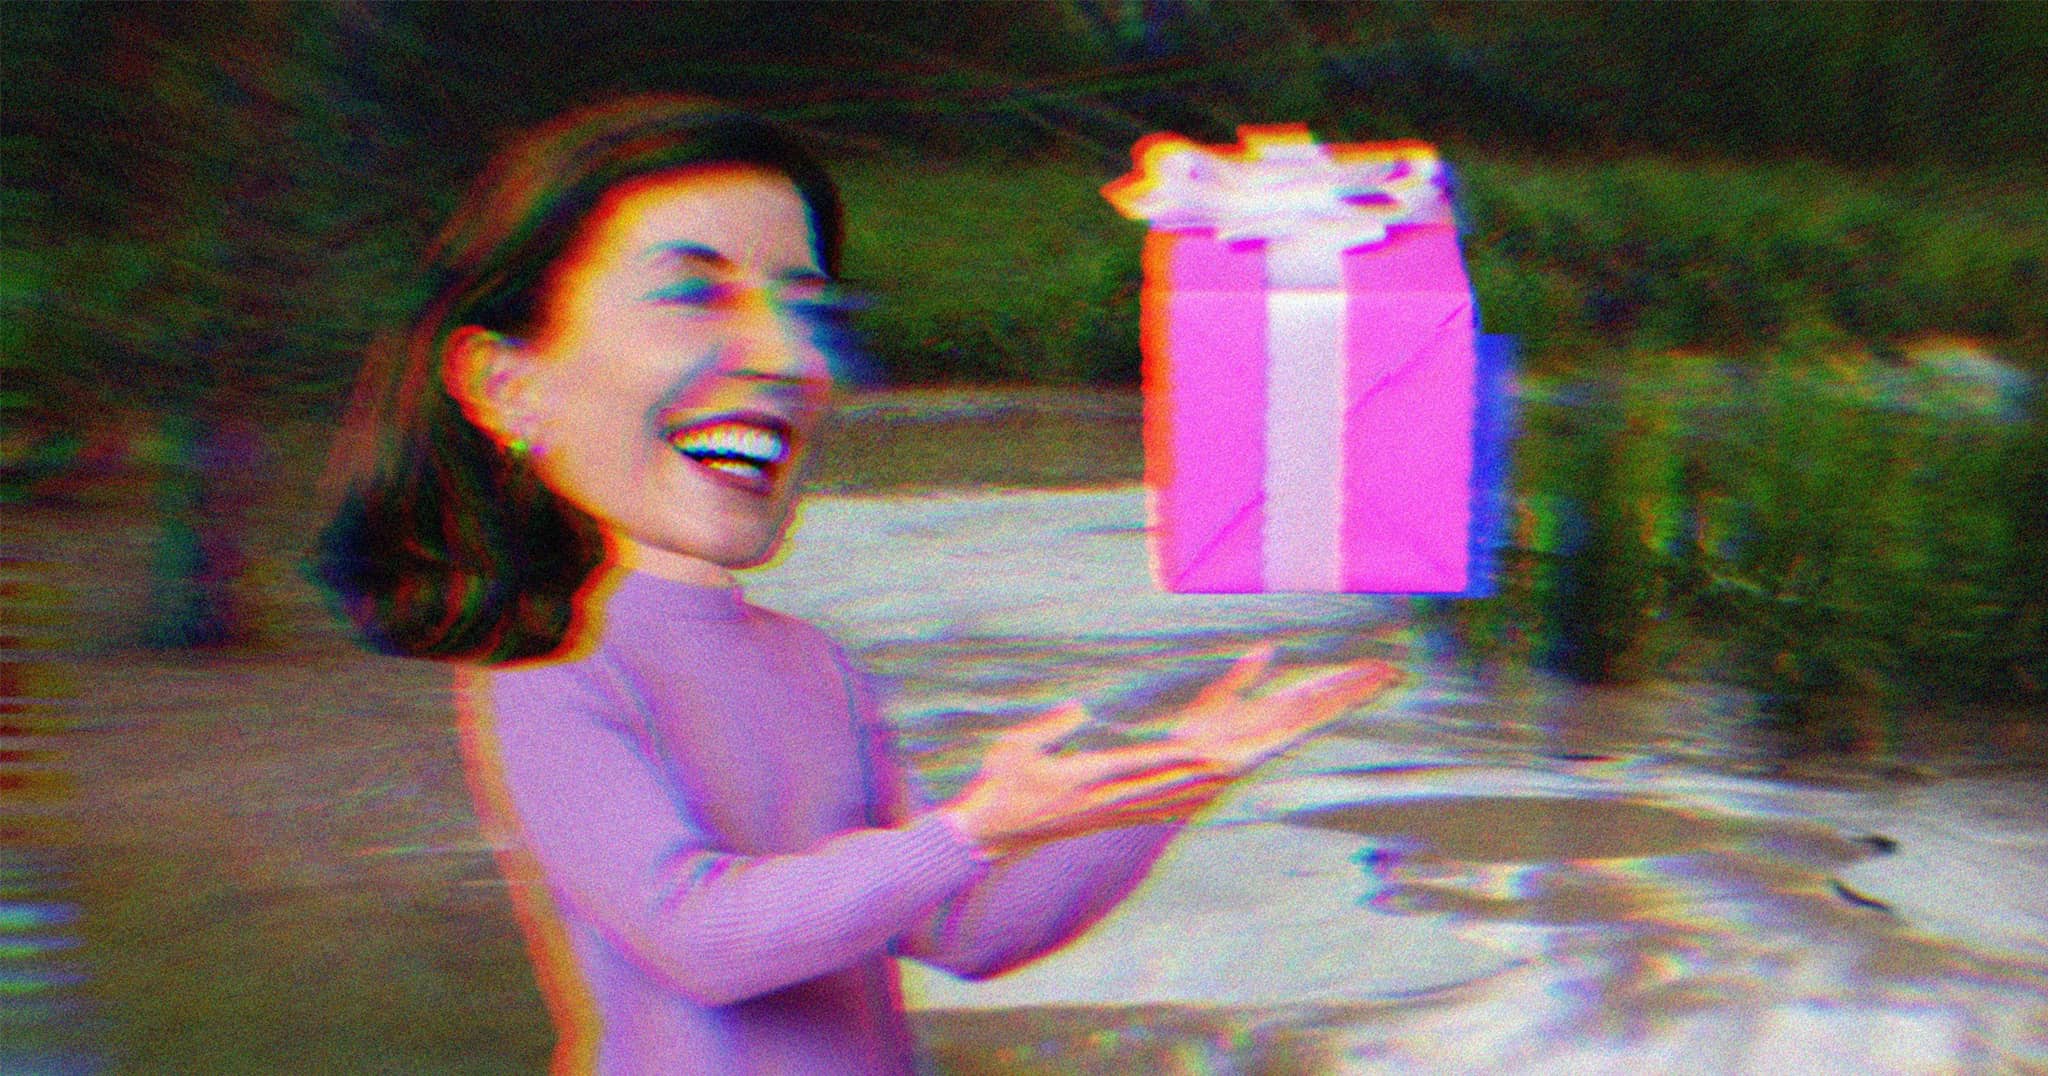 Kathy Hochul laughing and giving a gift. The background is a mudboil in the Tully Valley.